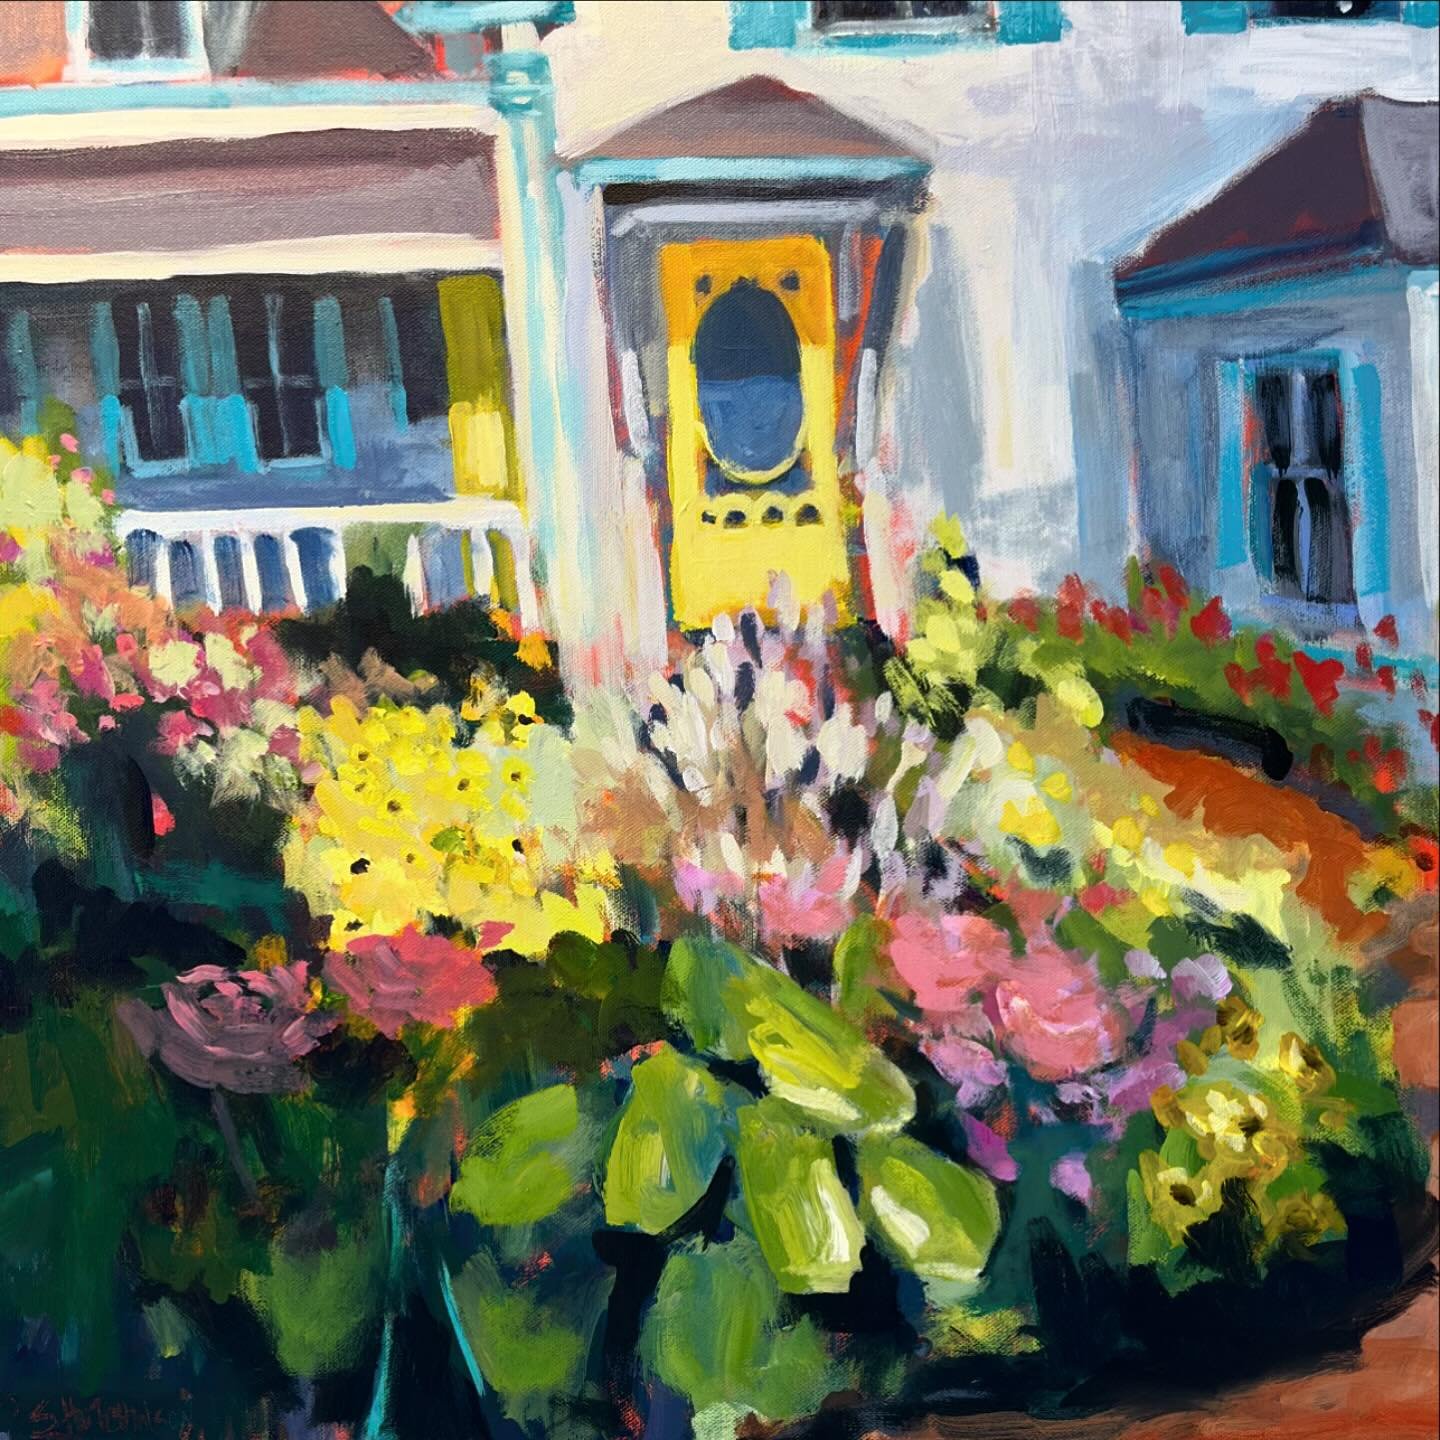 A few other favourites now on display at the Lunenburg Art Gallery. Still Life with Yellow is on display throughout the month of April and includes work by more than 100 artists. 

- &ldquo;The Yellow Door&rdquo; (acrylic on canvas) by Sally Hutchins